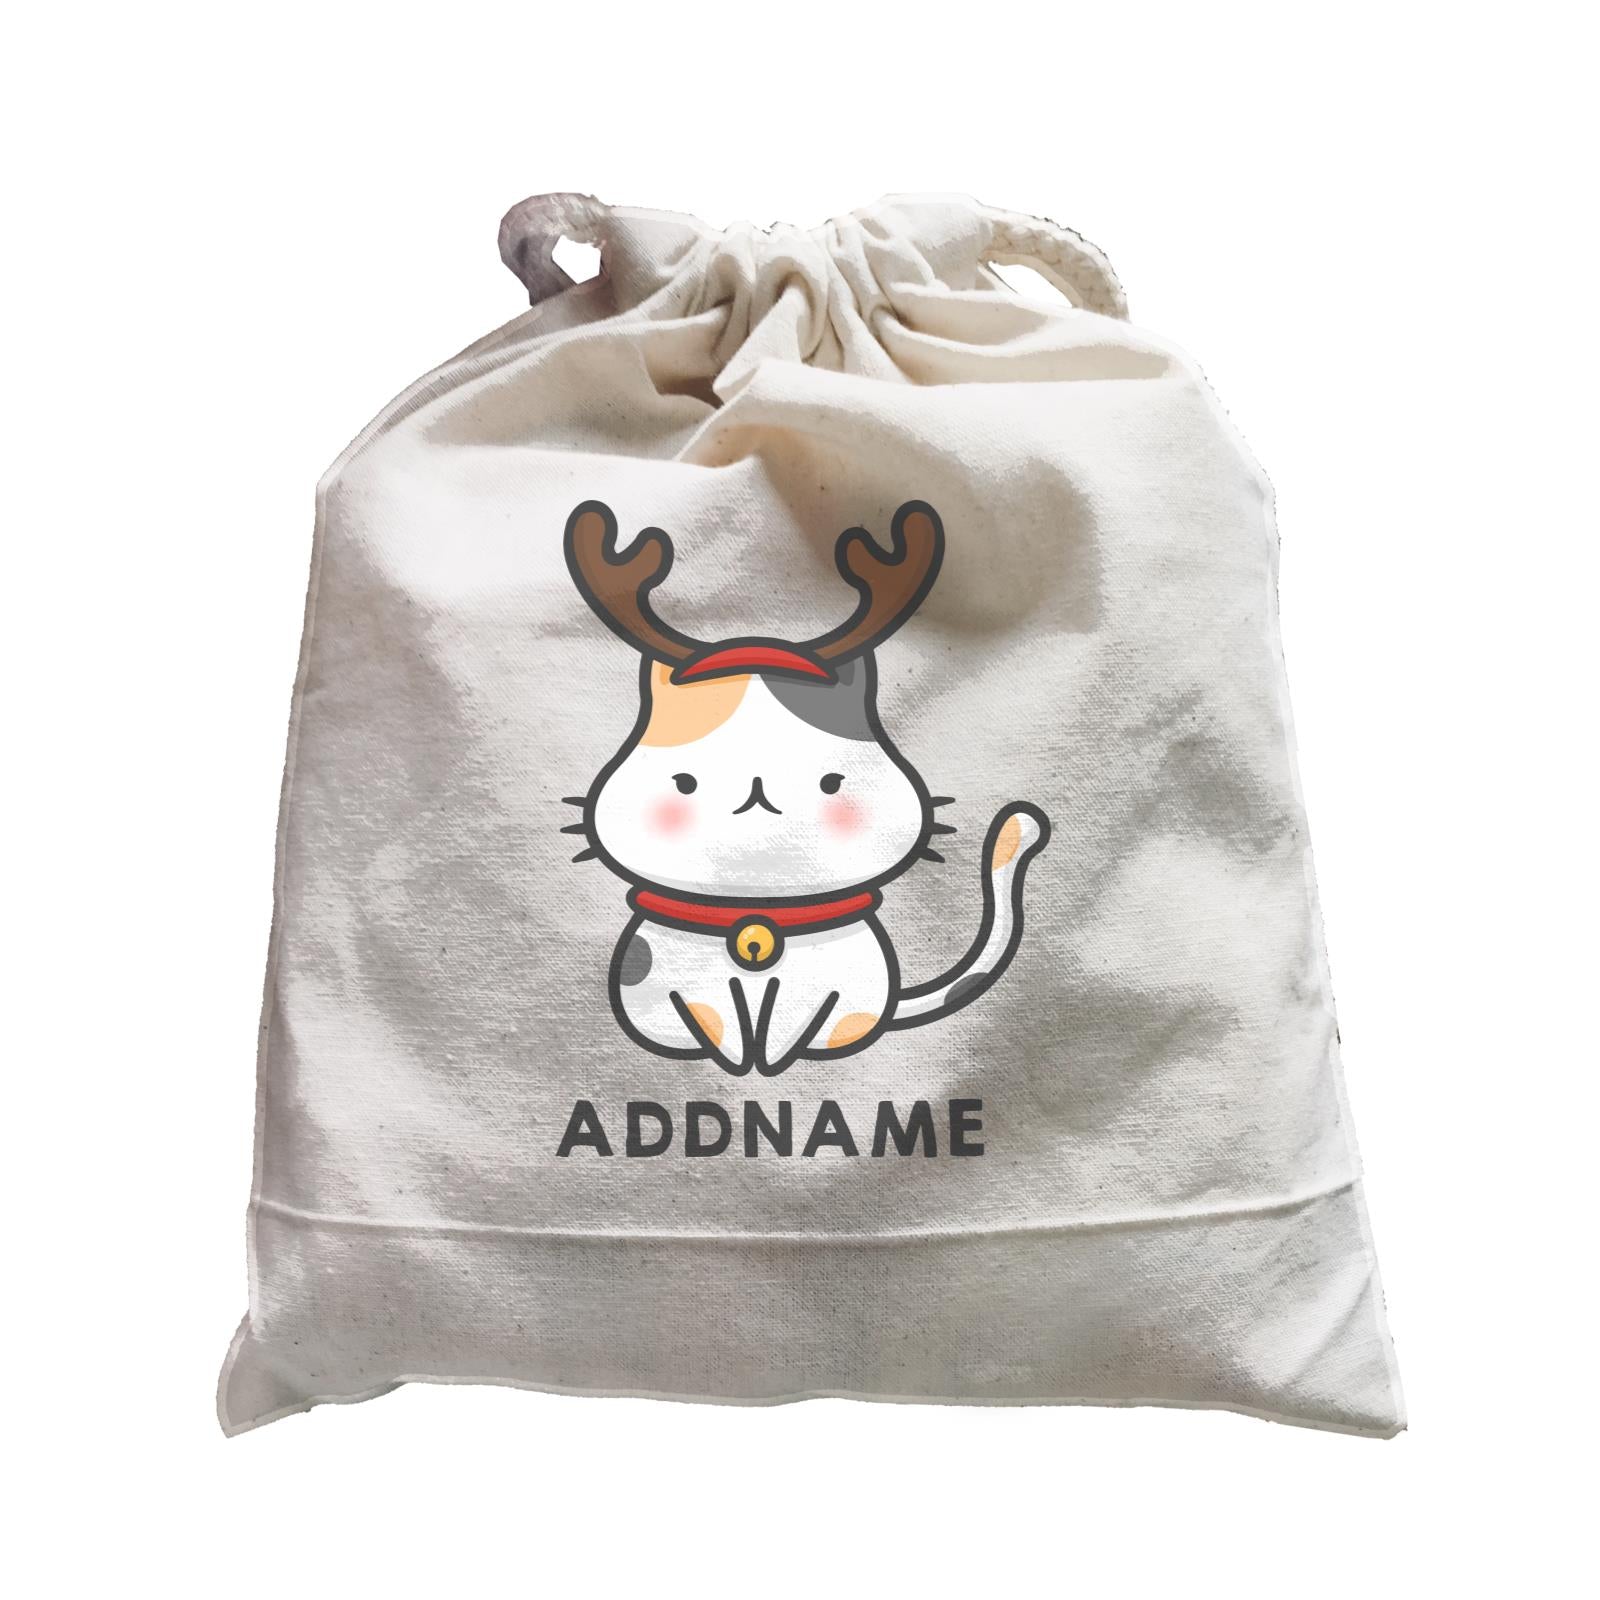 Xmas Cute Cat With Reindeer Antlers Addname Accessories Satchel